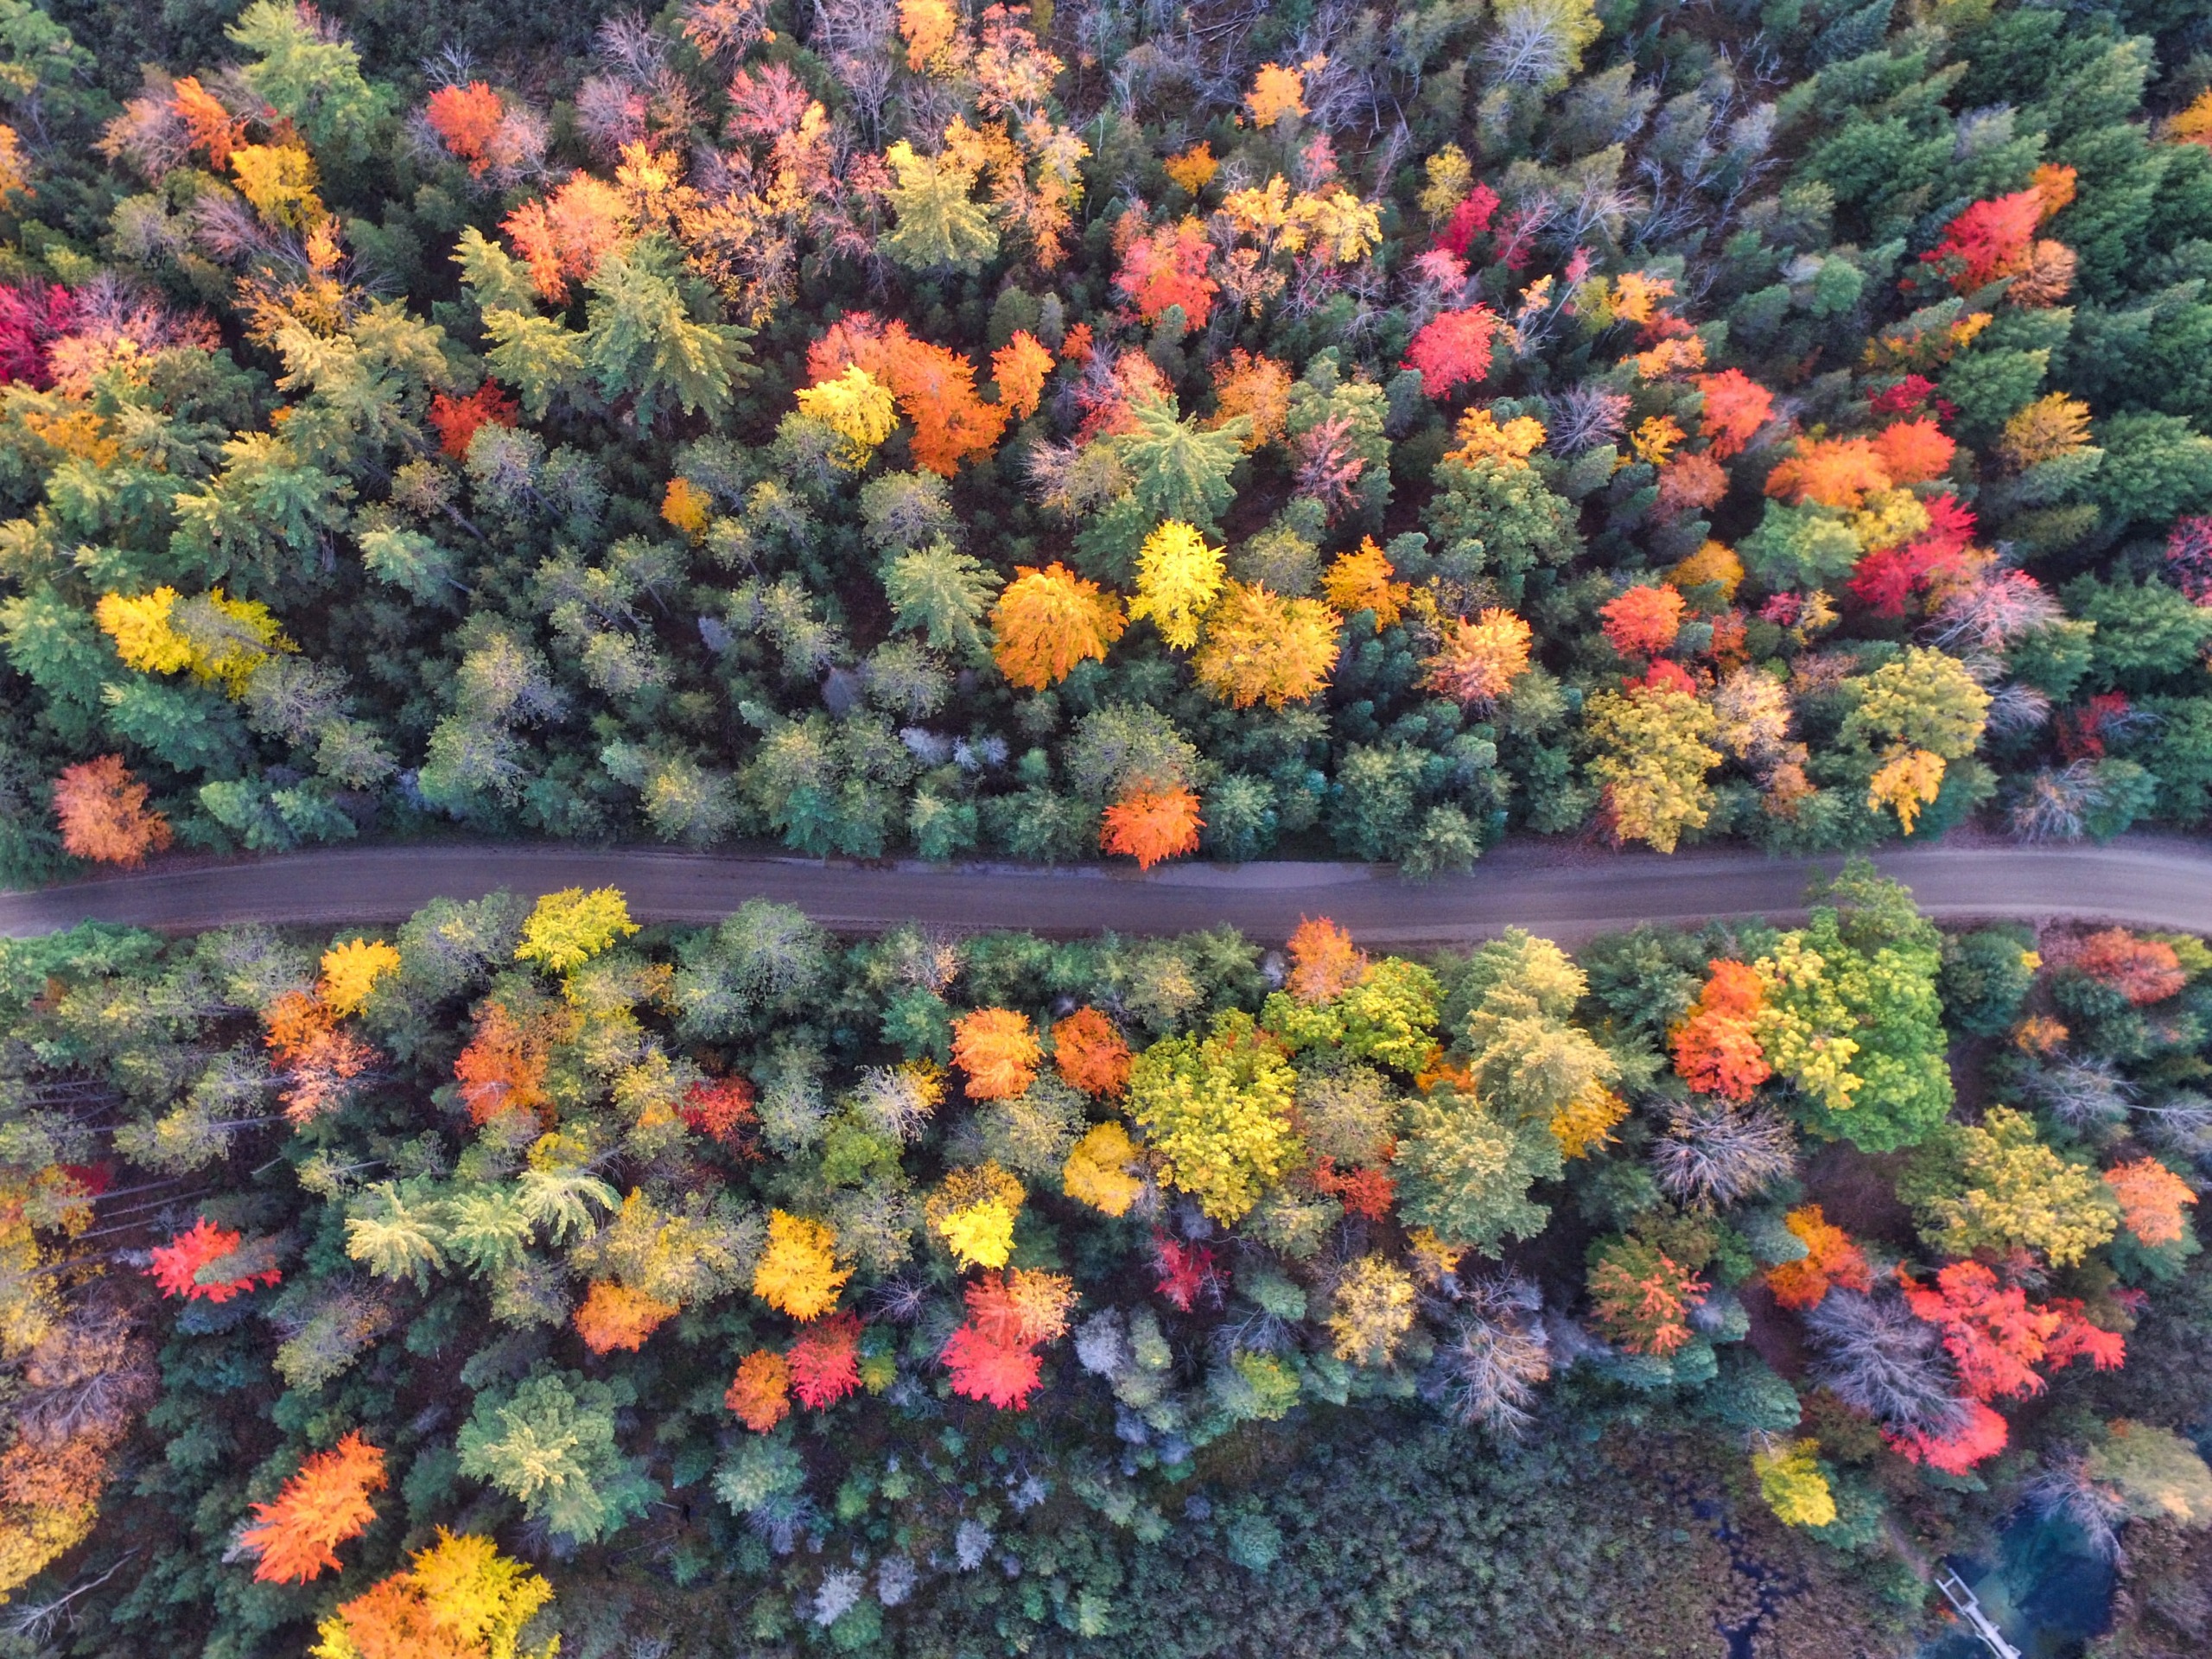 The Best Places to Watch the Leaves Change Color this Fall